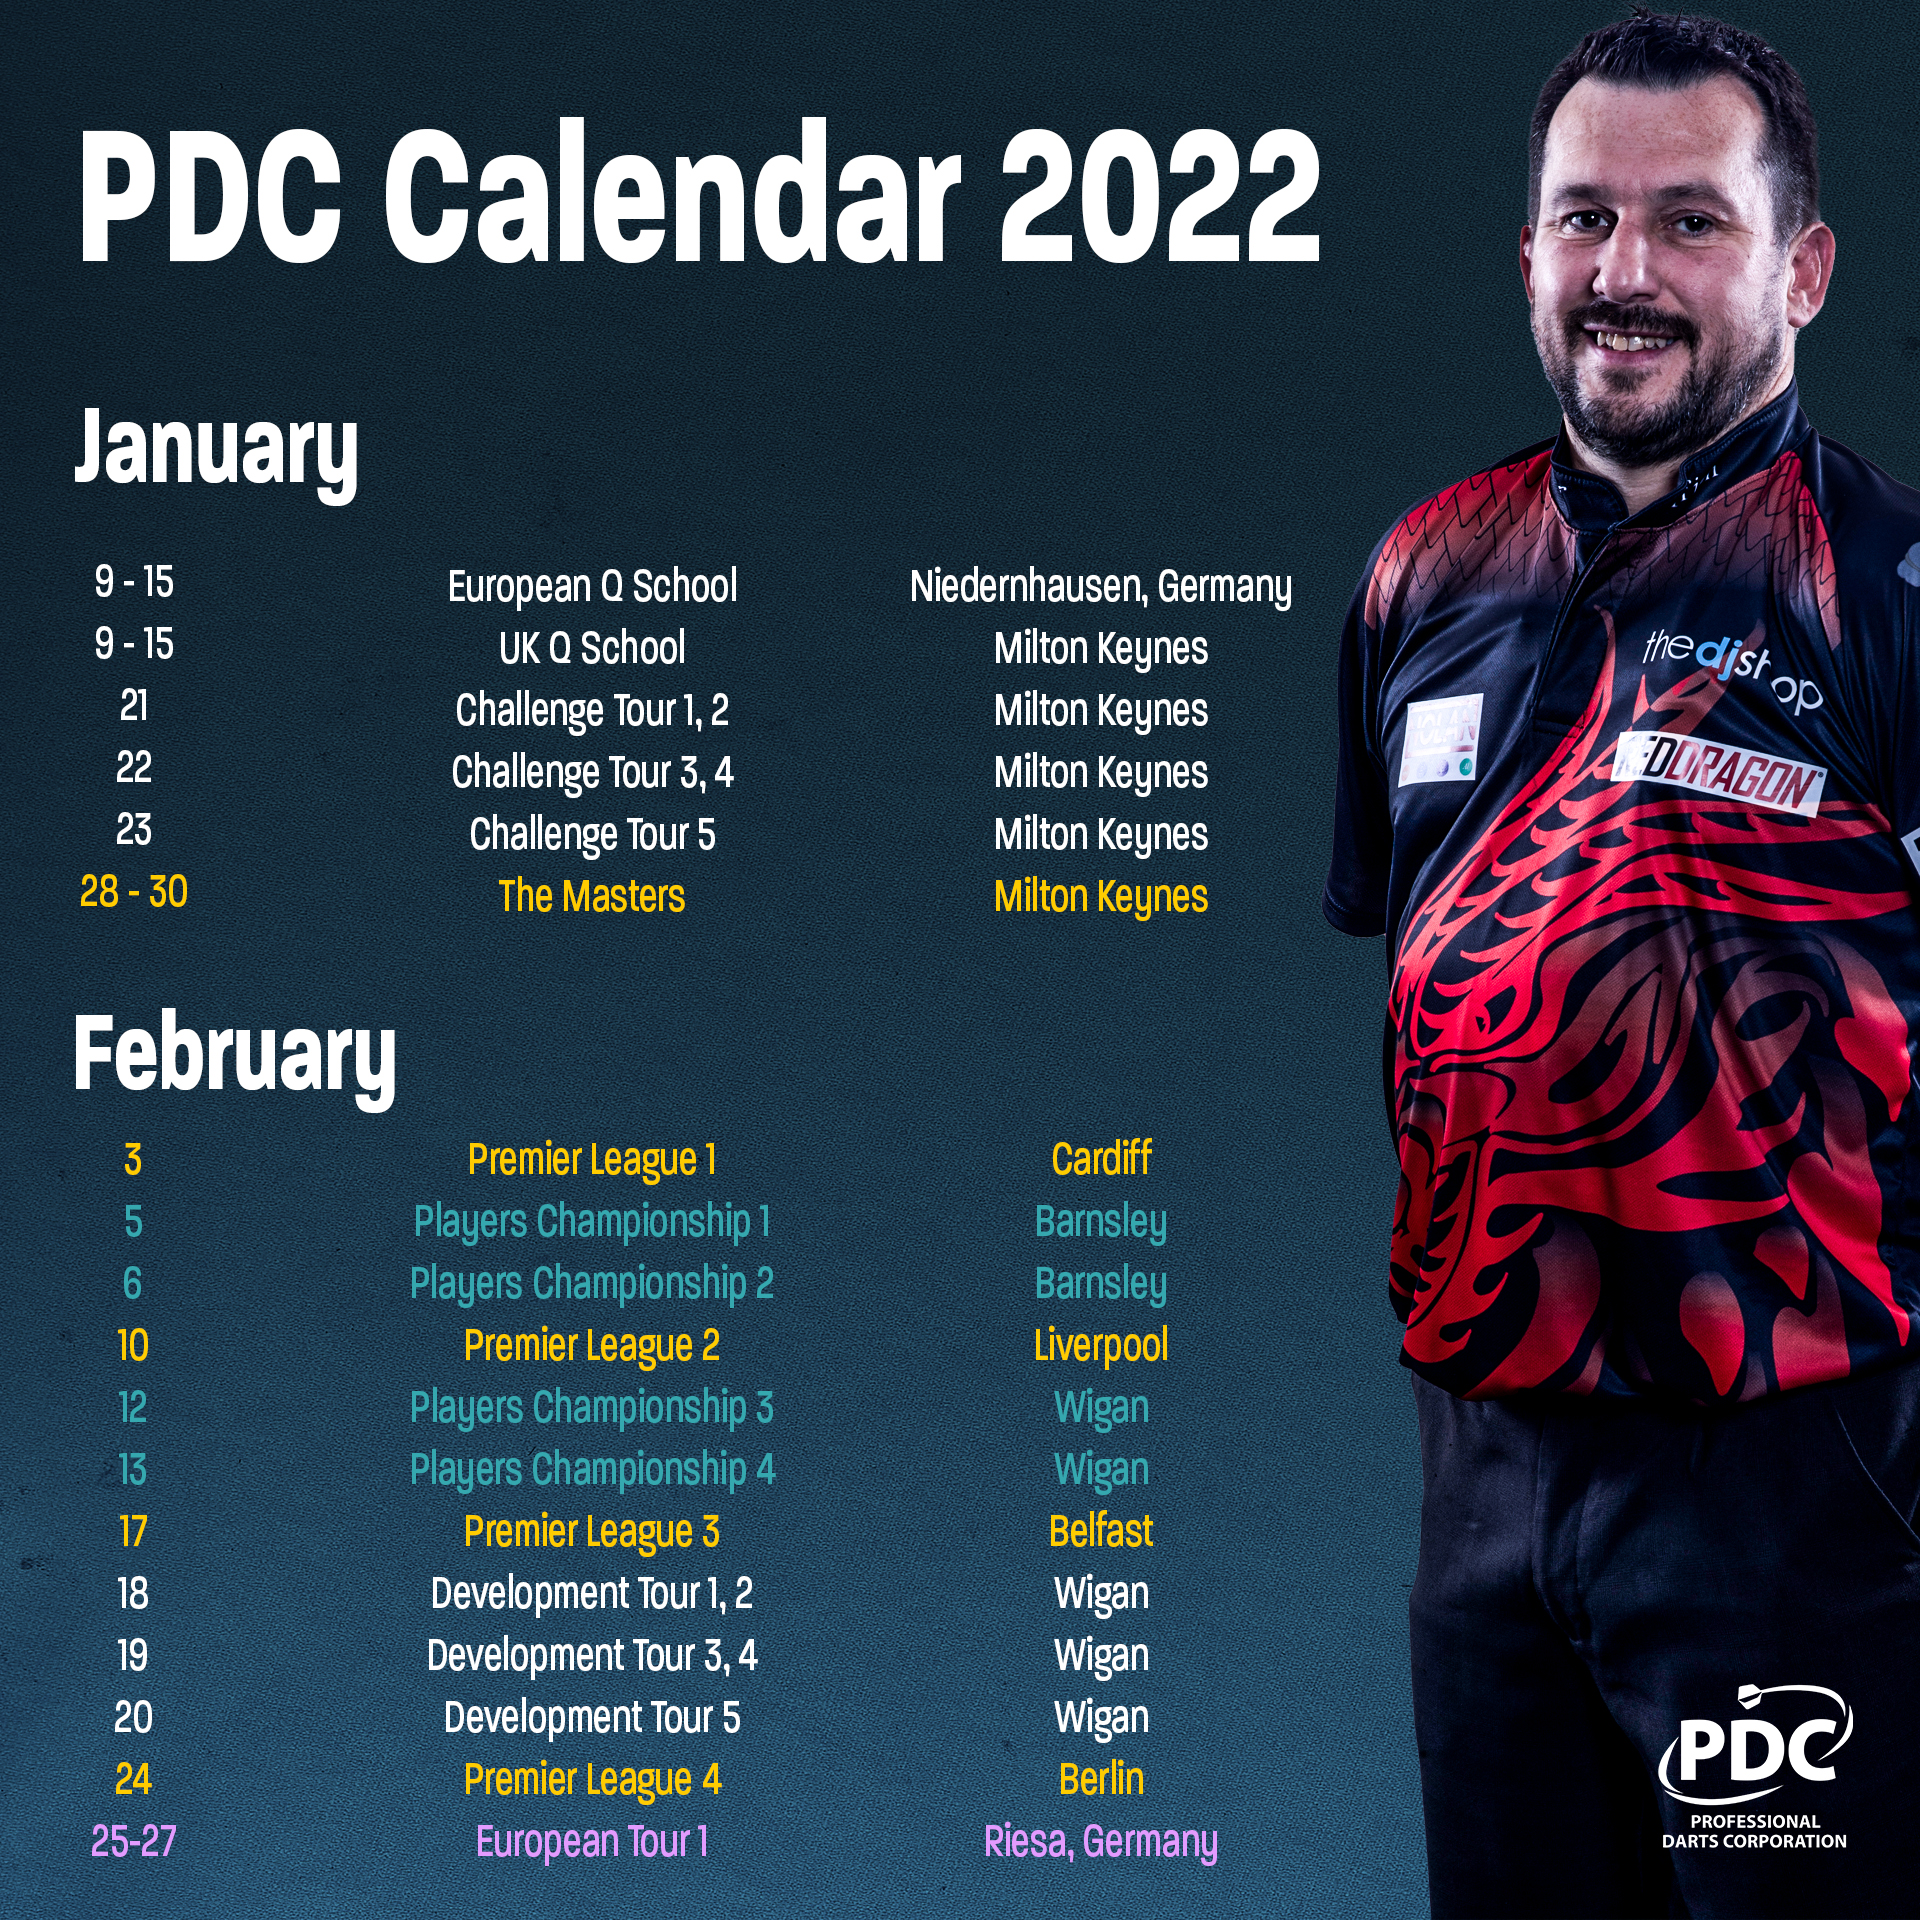 New Trier Calendar 2022 2022 Pdc Calendar Confirmed Up To End Of October | Pdc